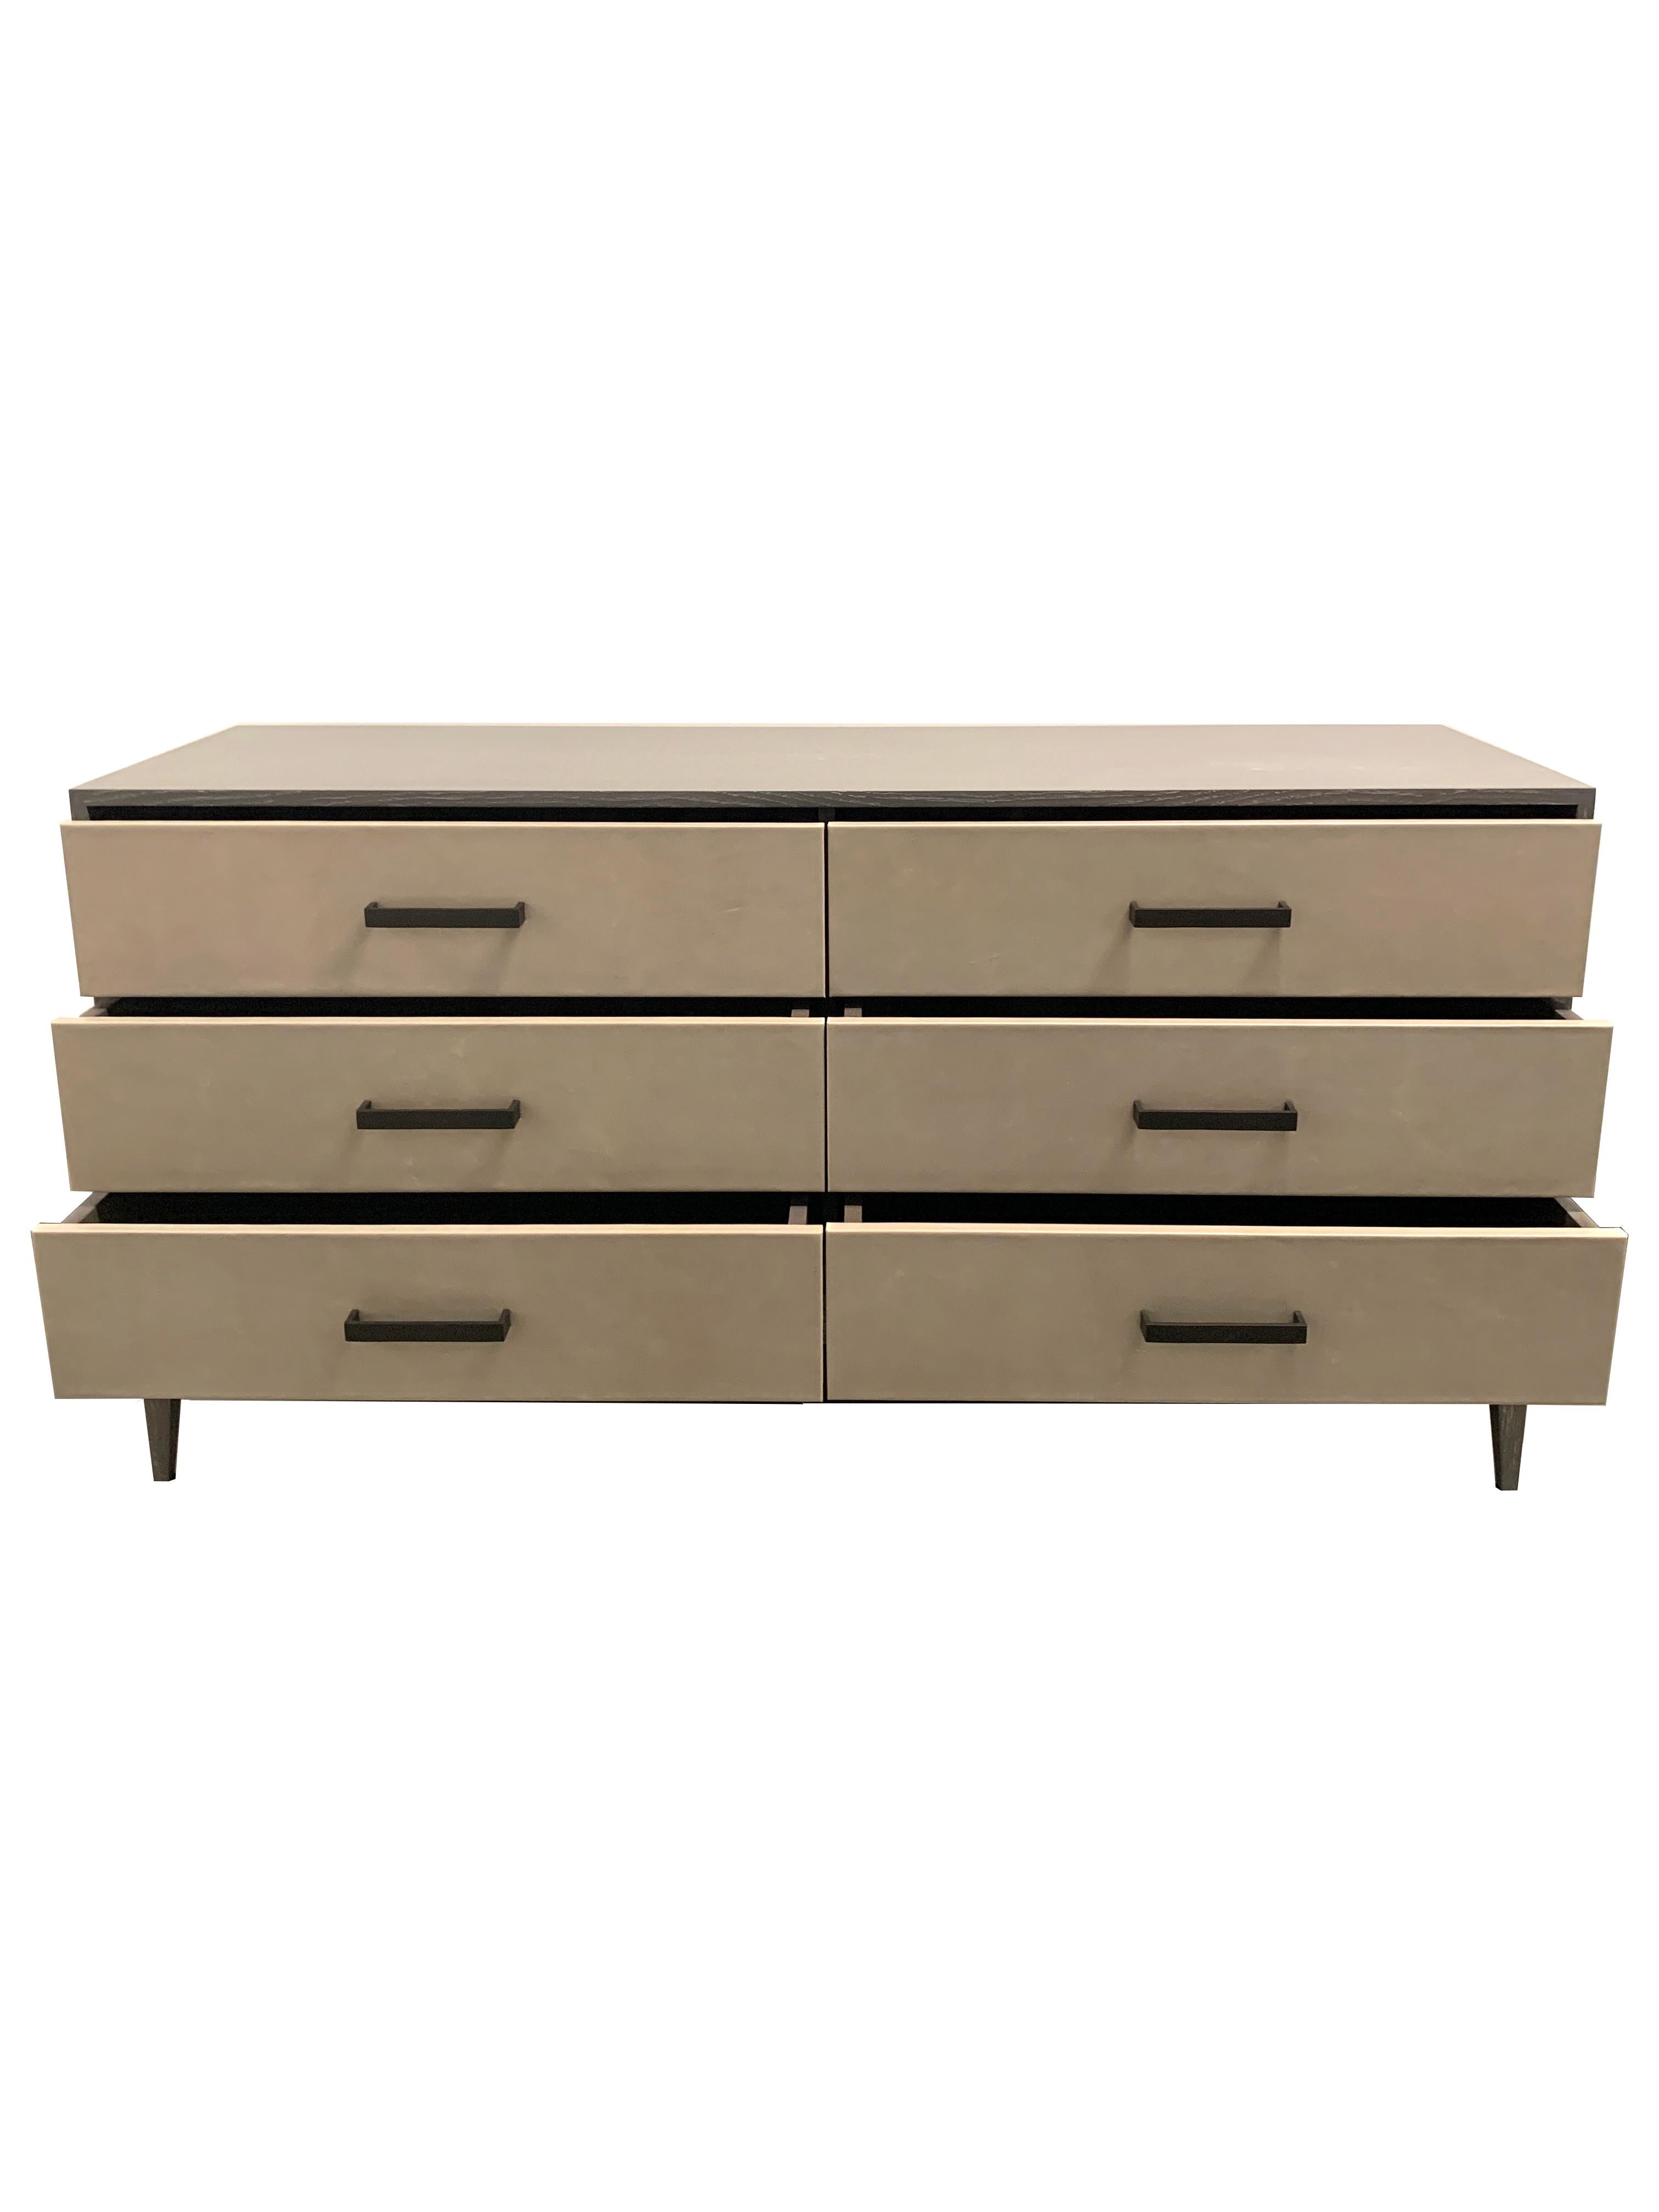 The leather drawer chest by Ercole Home has a 6-drawer, with a Pearl leather front. Natural Steel Pulls adorn each drawer front and are all equipped self-closing hardware.
Custom sizes and finishes are available. You can add drawers and